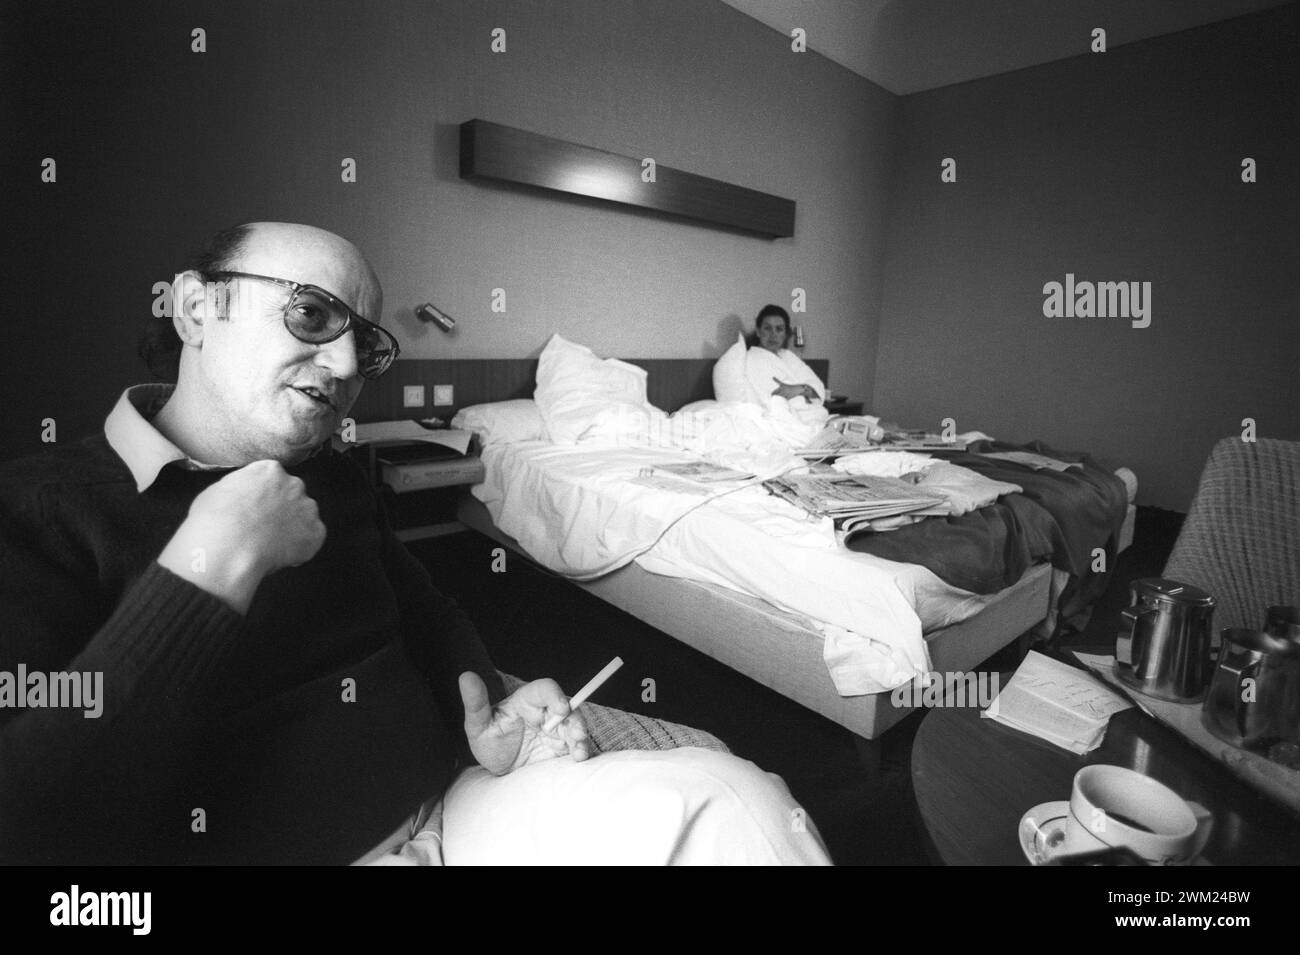 MME4775308 Cannes Film Festival 1983. Greek movie director Theo Angelopoulos in his hotel room/Festival del Cinema di Cannes 1983. He registered Theo Angelopoulos nella sua camera d'albergo -; (add.info.: Cannes Film Festival 1983. Greek movie director Theo Angelopoulos in his hotel room/Festival del Cinema di Cannes 1983. He registered Theo Angelopoulos nella sua camera d'albergo -); © Marcello Mencarini. All rights reserved 2024. Stock Photo